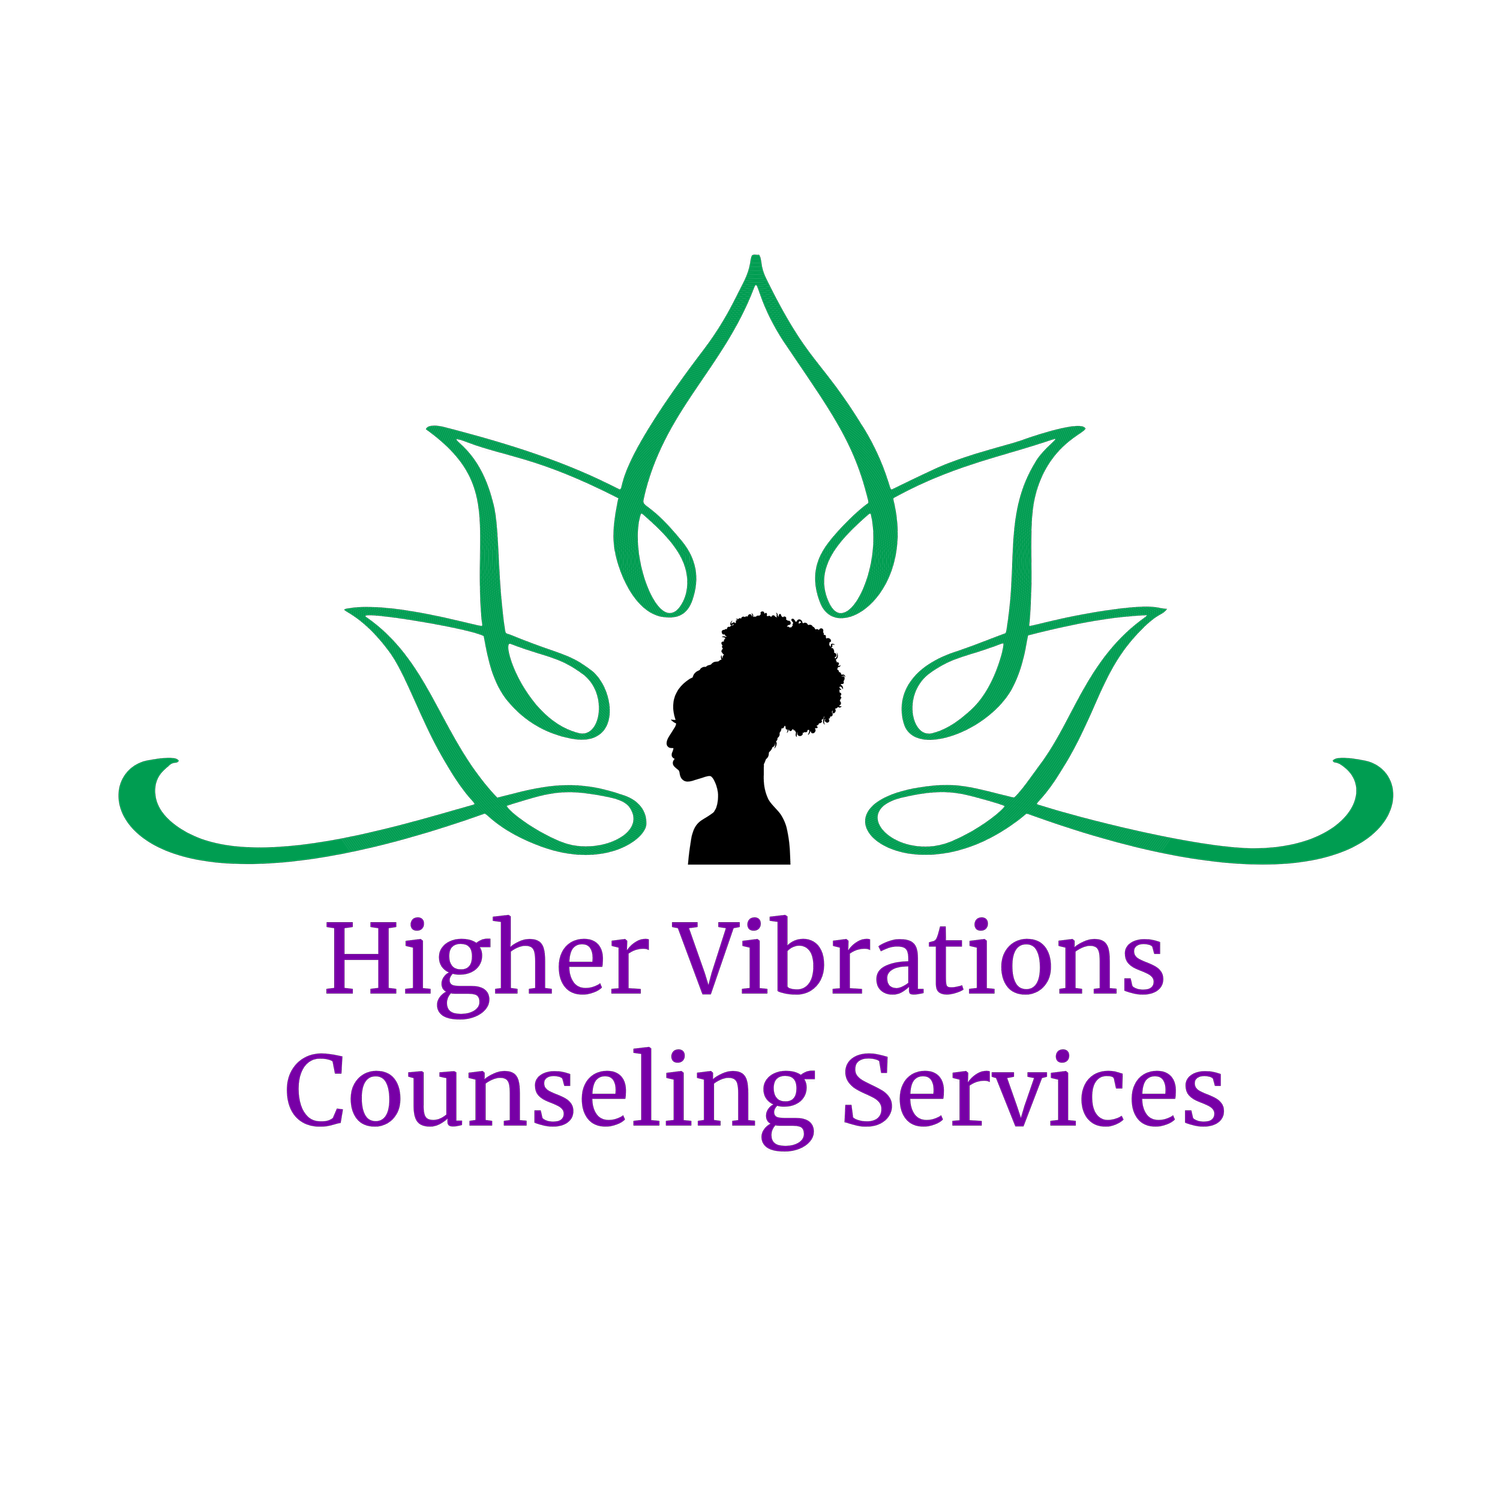 Higher Vibrations Counseling Services